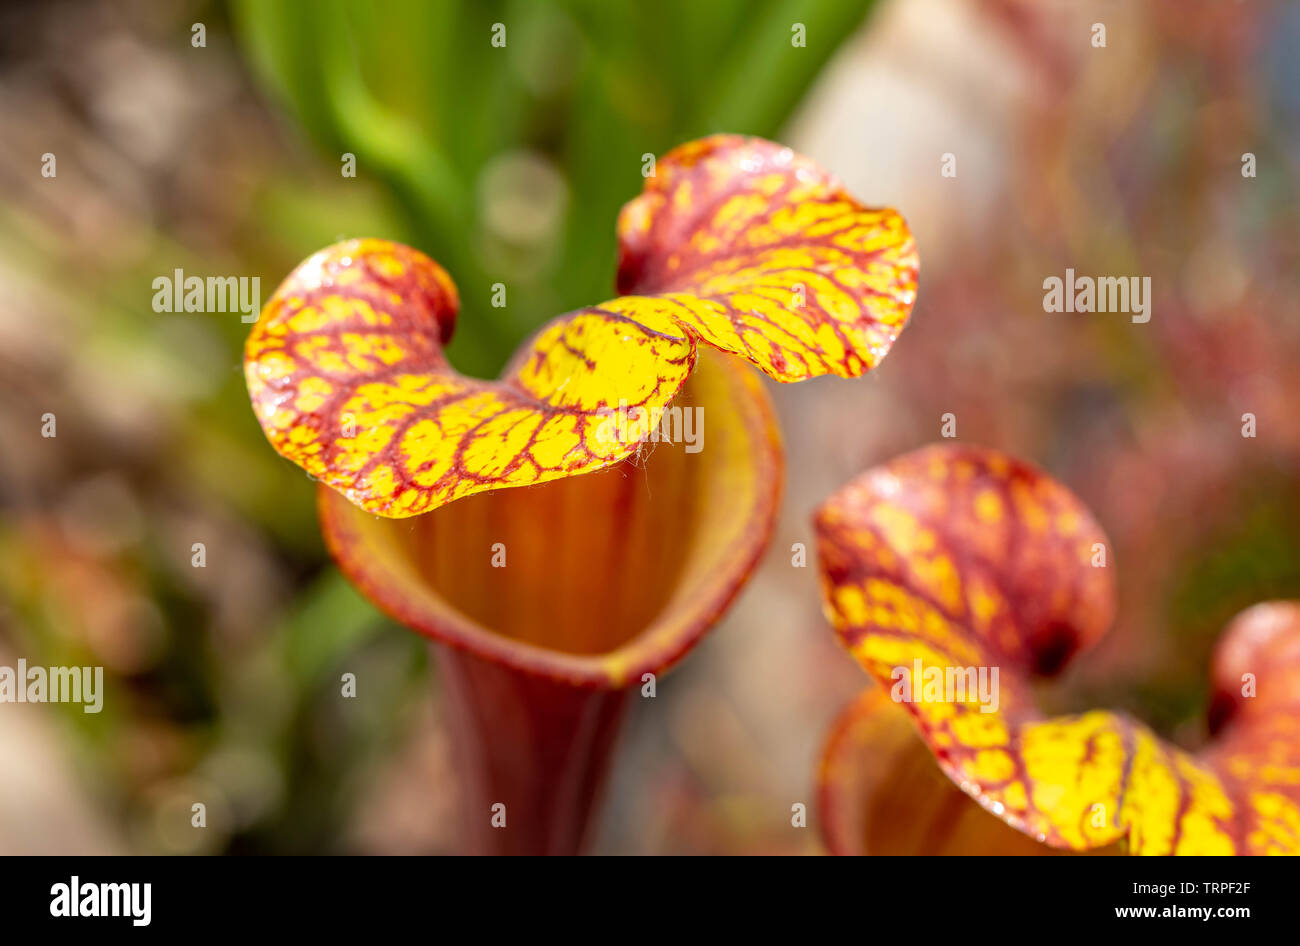 funny smiling face carnivorous plant, heart shaped natural flytrap Stock Photo